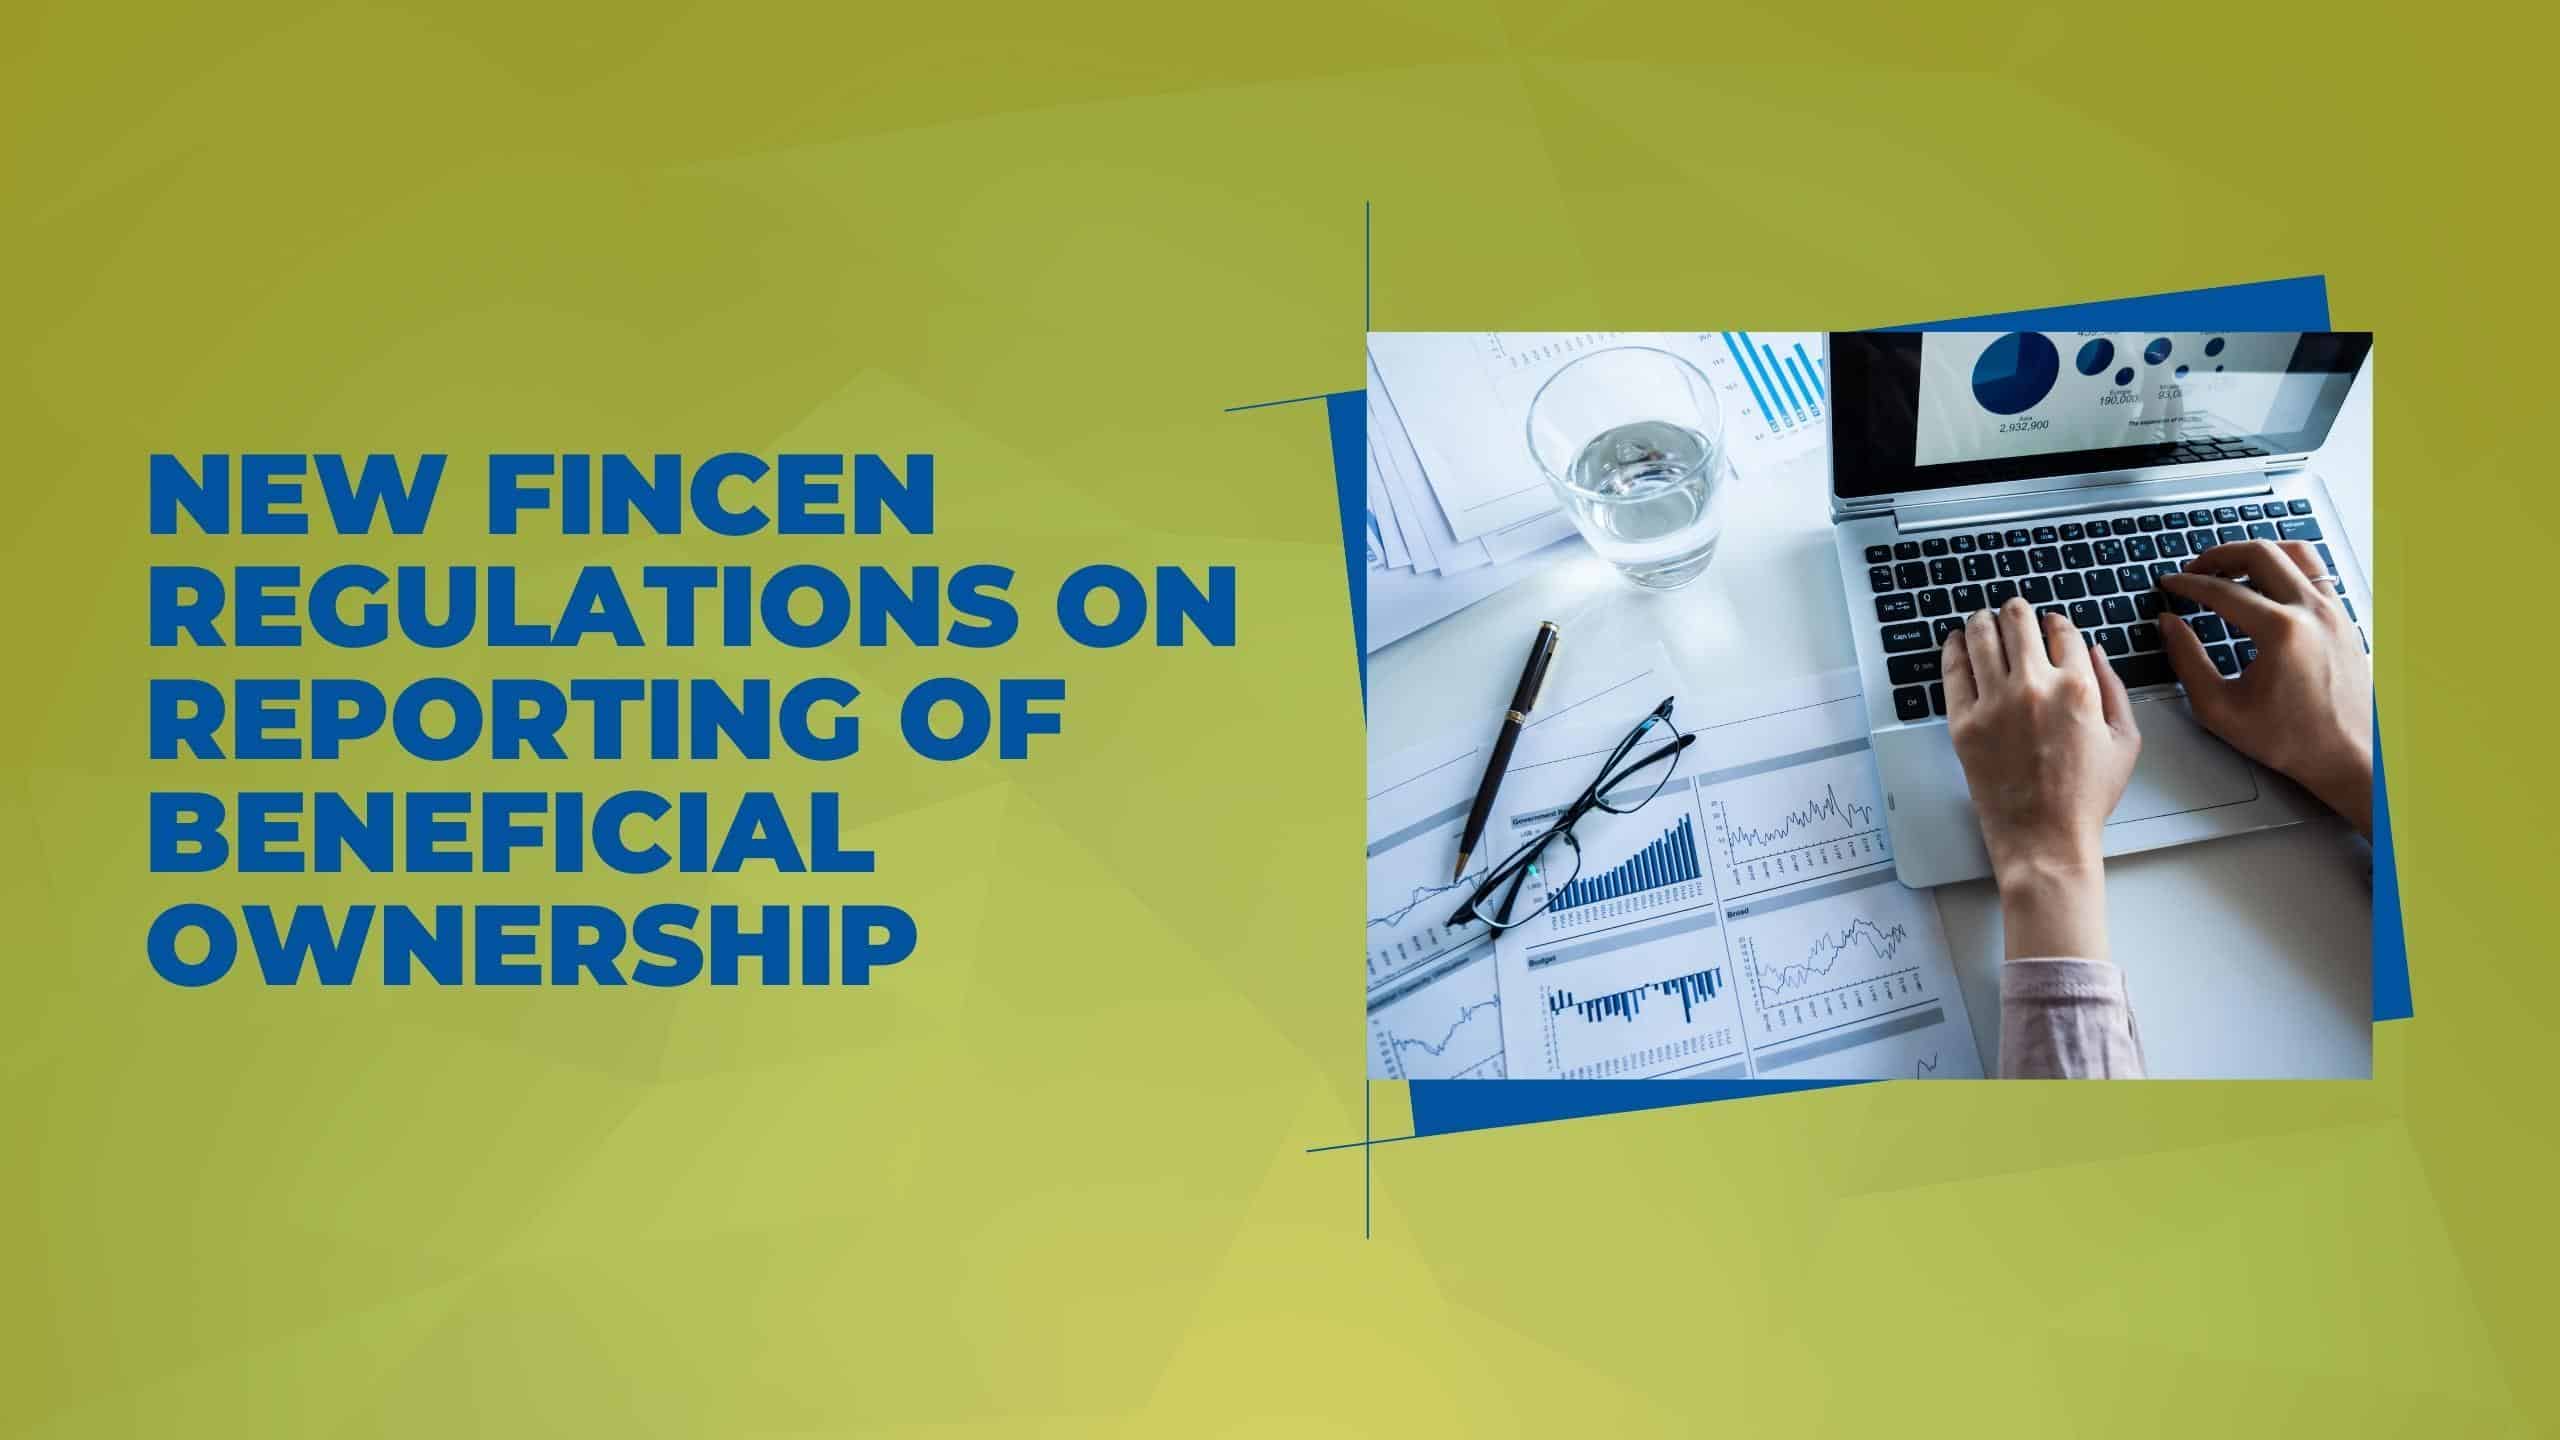 New FinCEN Regulations on Reporting of Beneficial Ownership